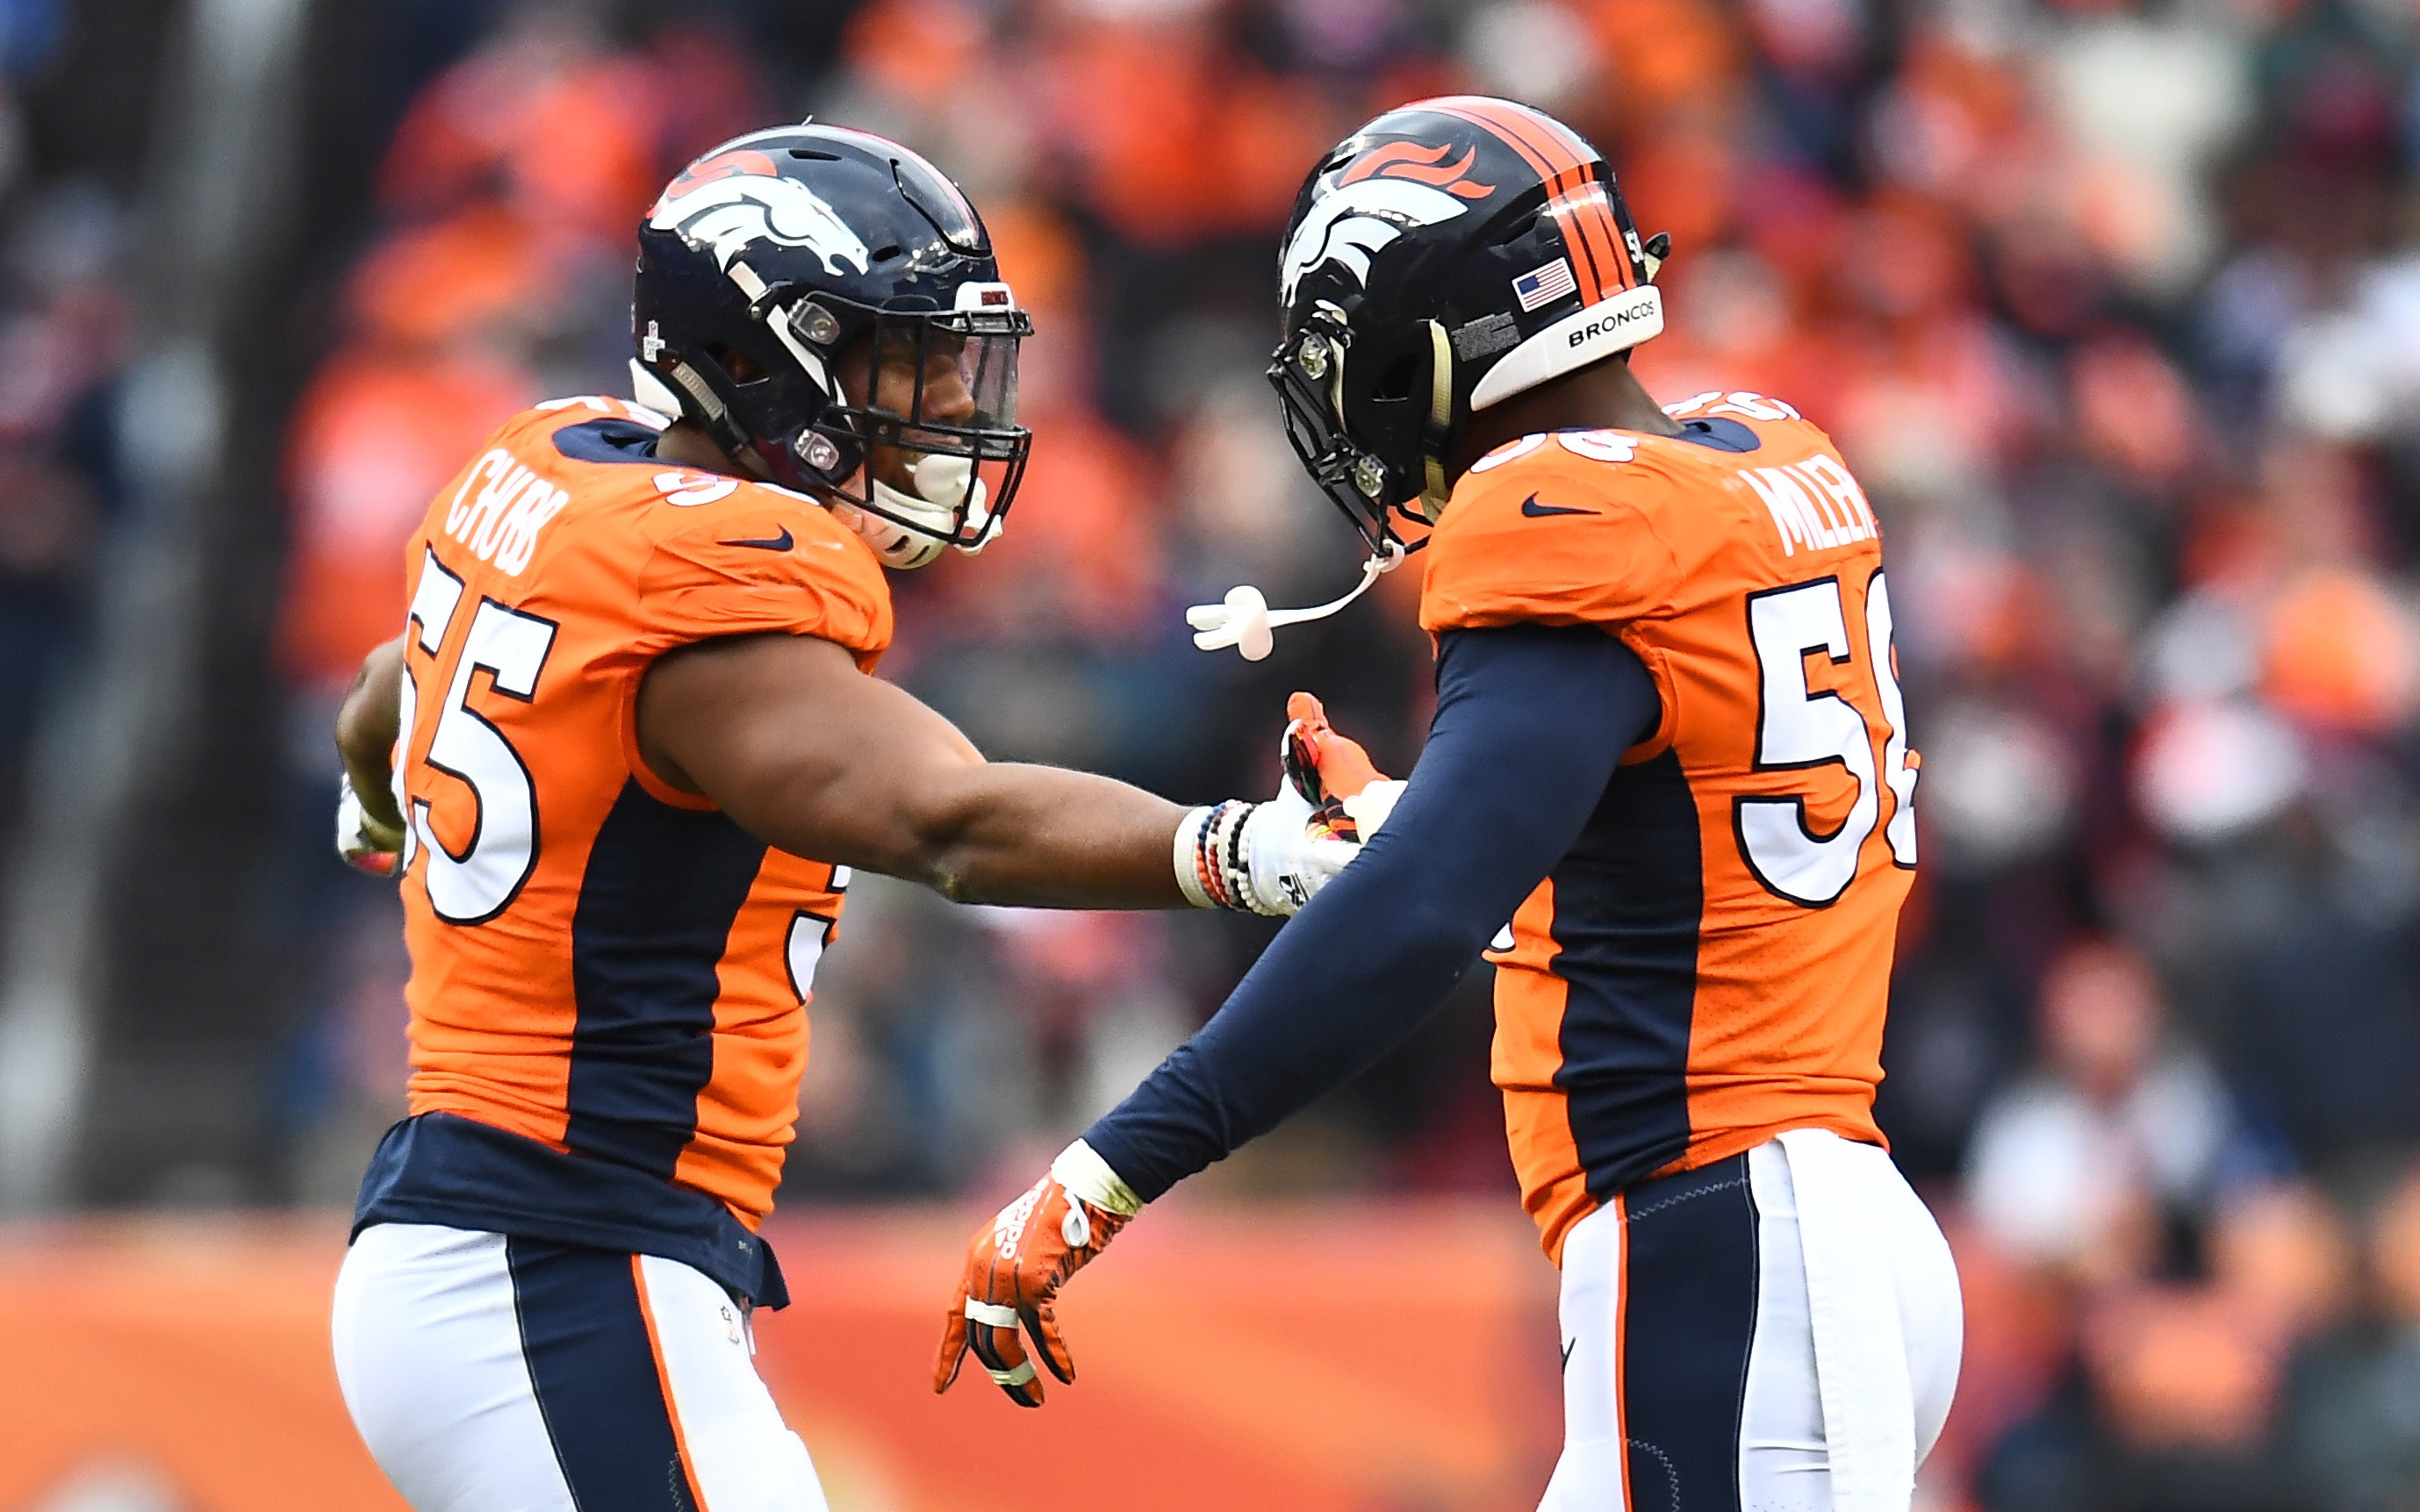 Von Miller and Bradley Chubb celebrate in 2018. Credit: Ron Chenoy, USA TODAY Sports.